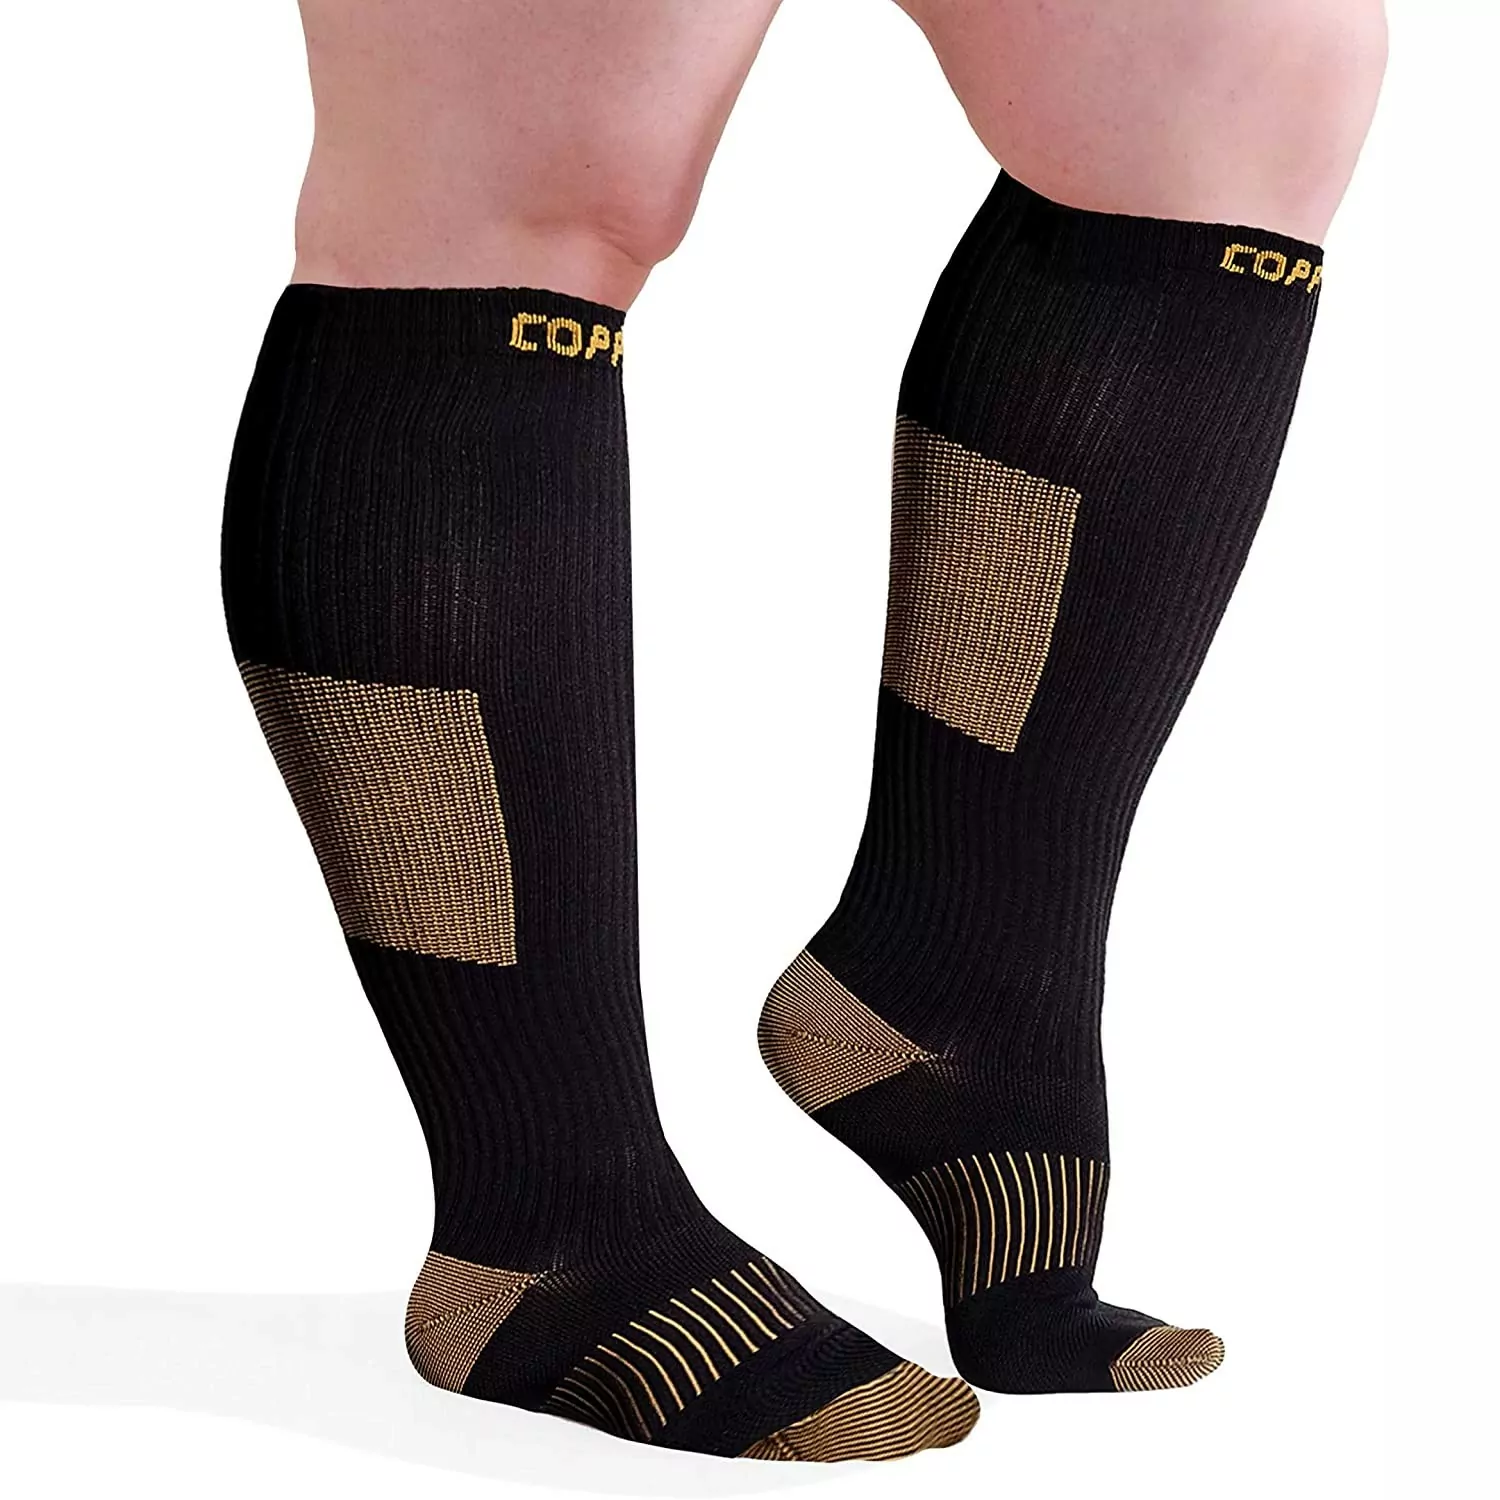 Unisex Copper Infused Compression Socks 20-30mmHg Graduated Leg Care For Sports